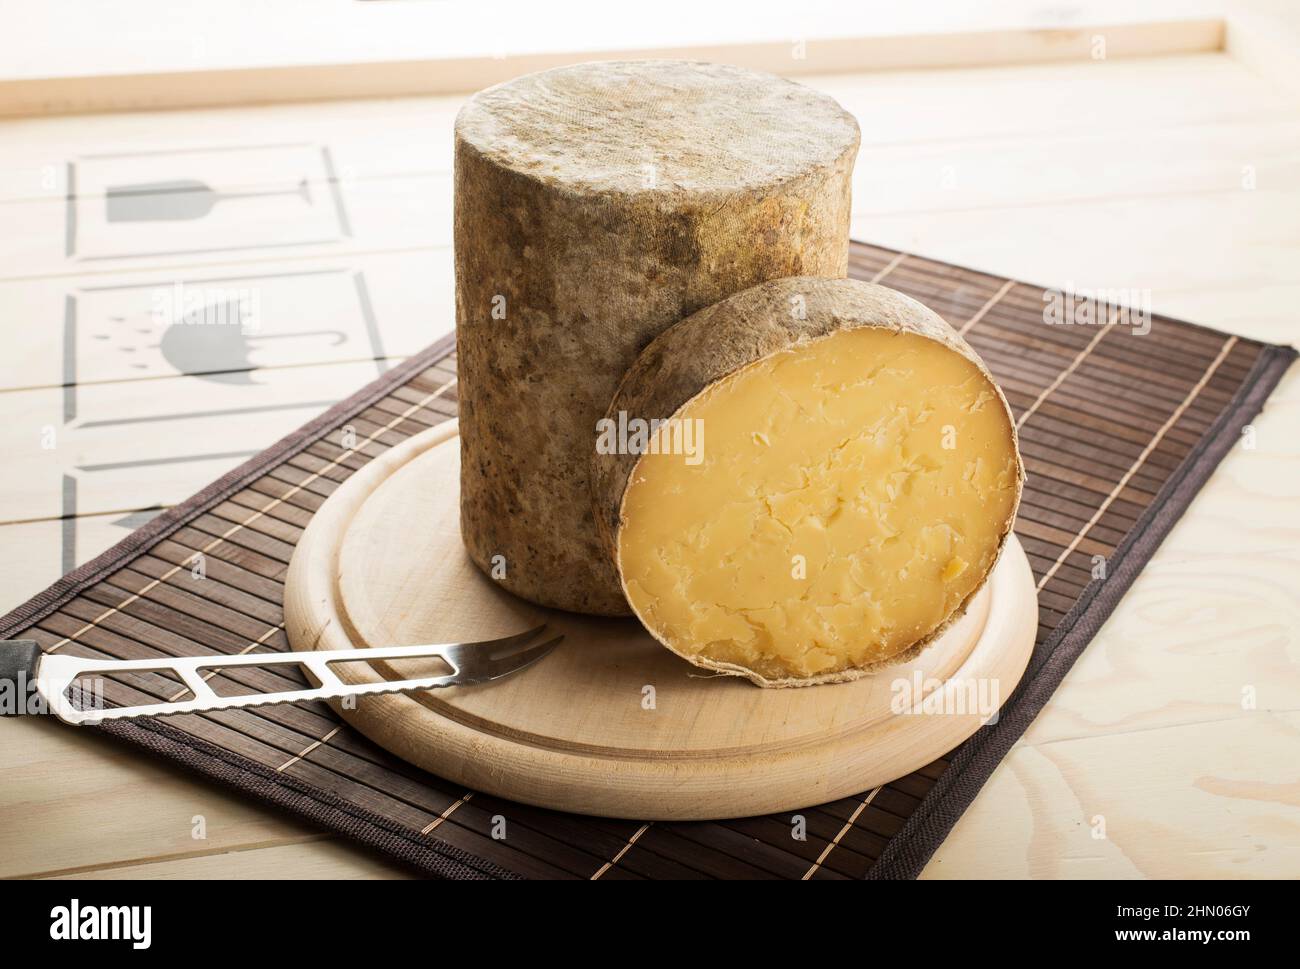 Cheddar PDO cheese cut and served on a wooden plate. Stock Photo